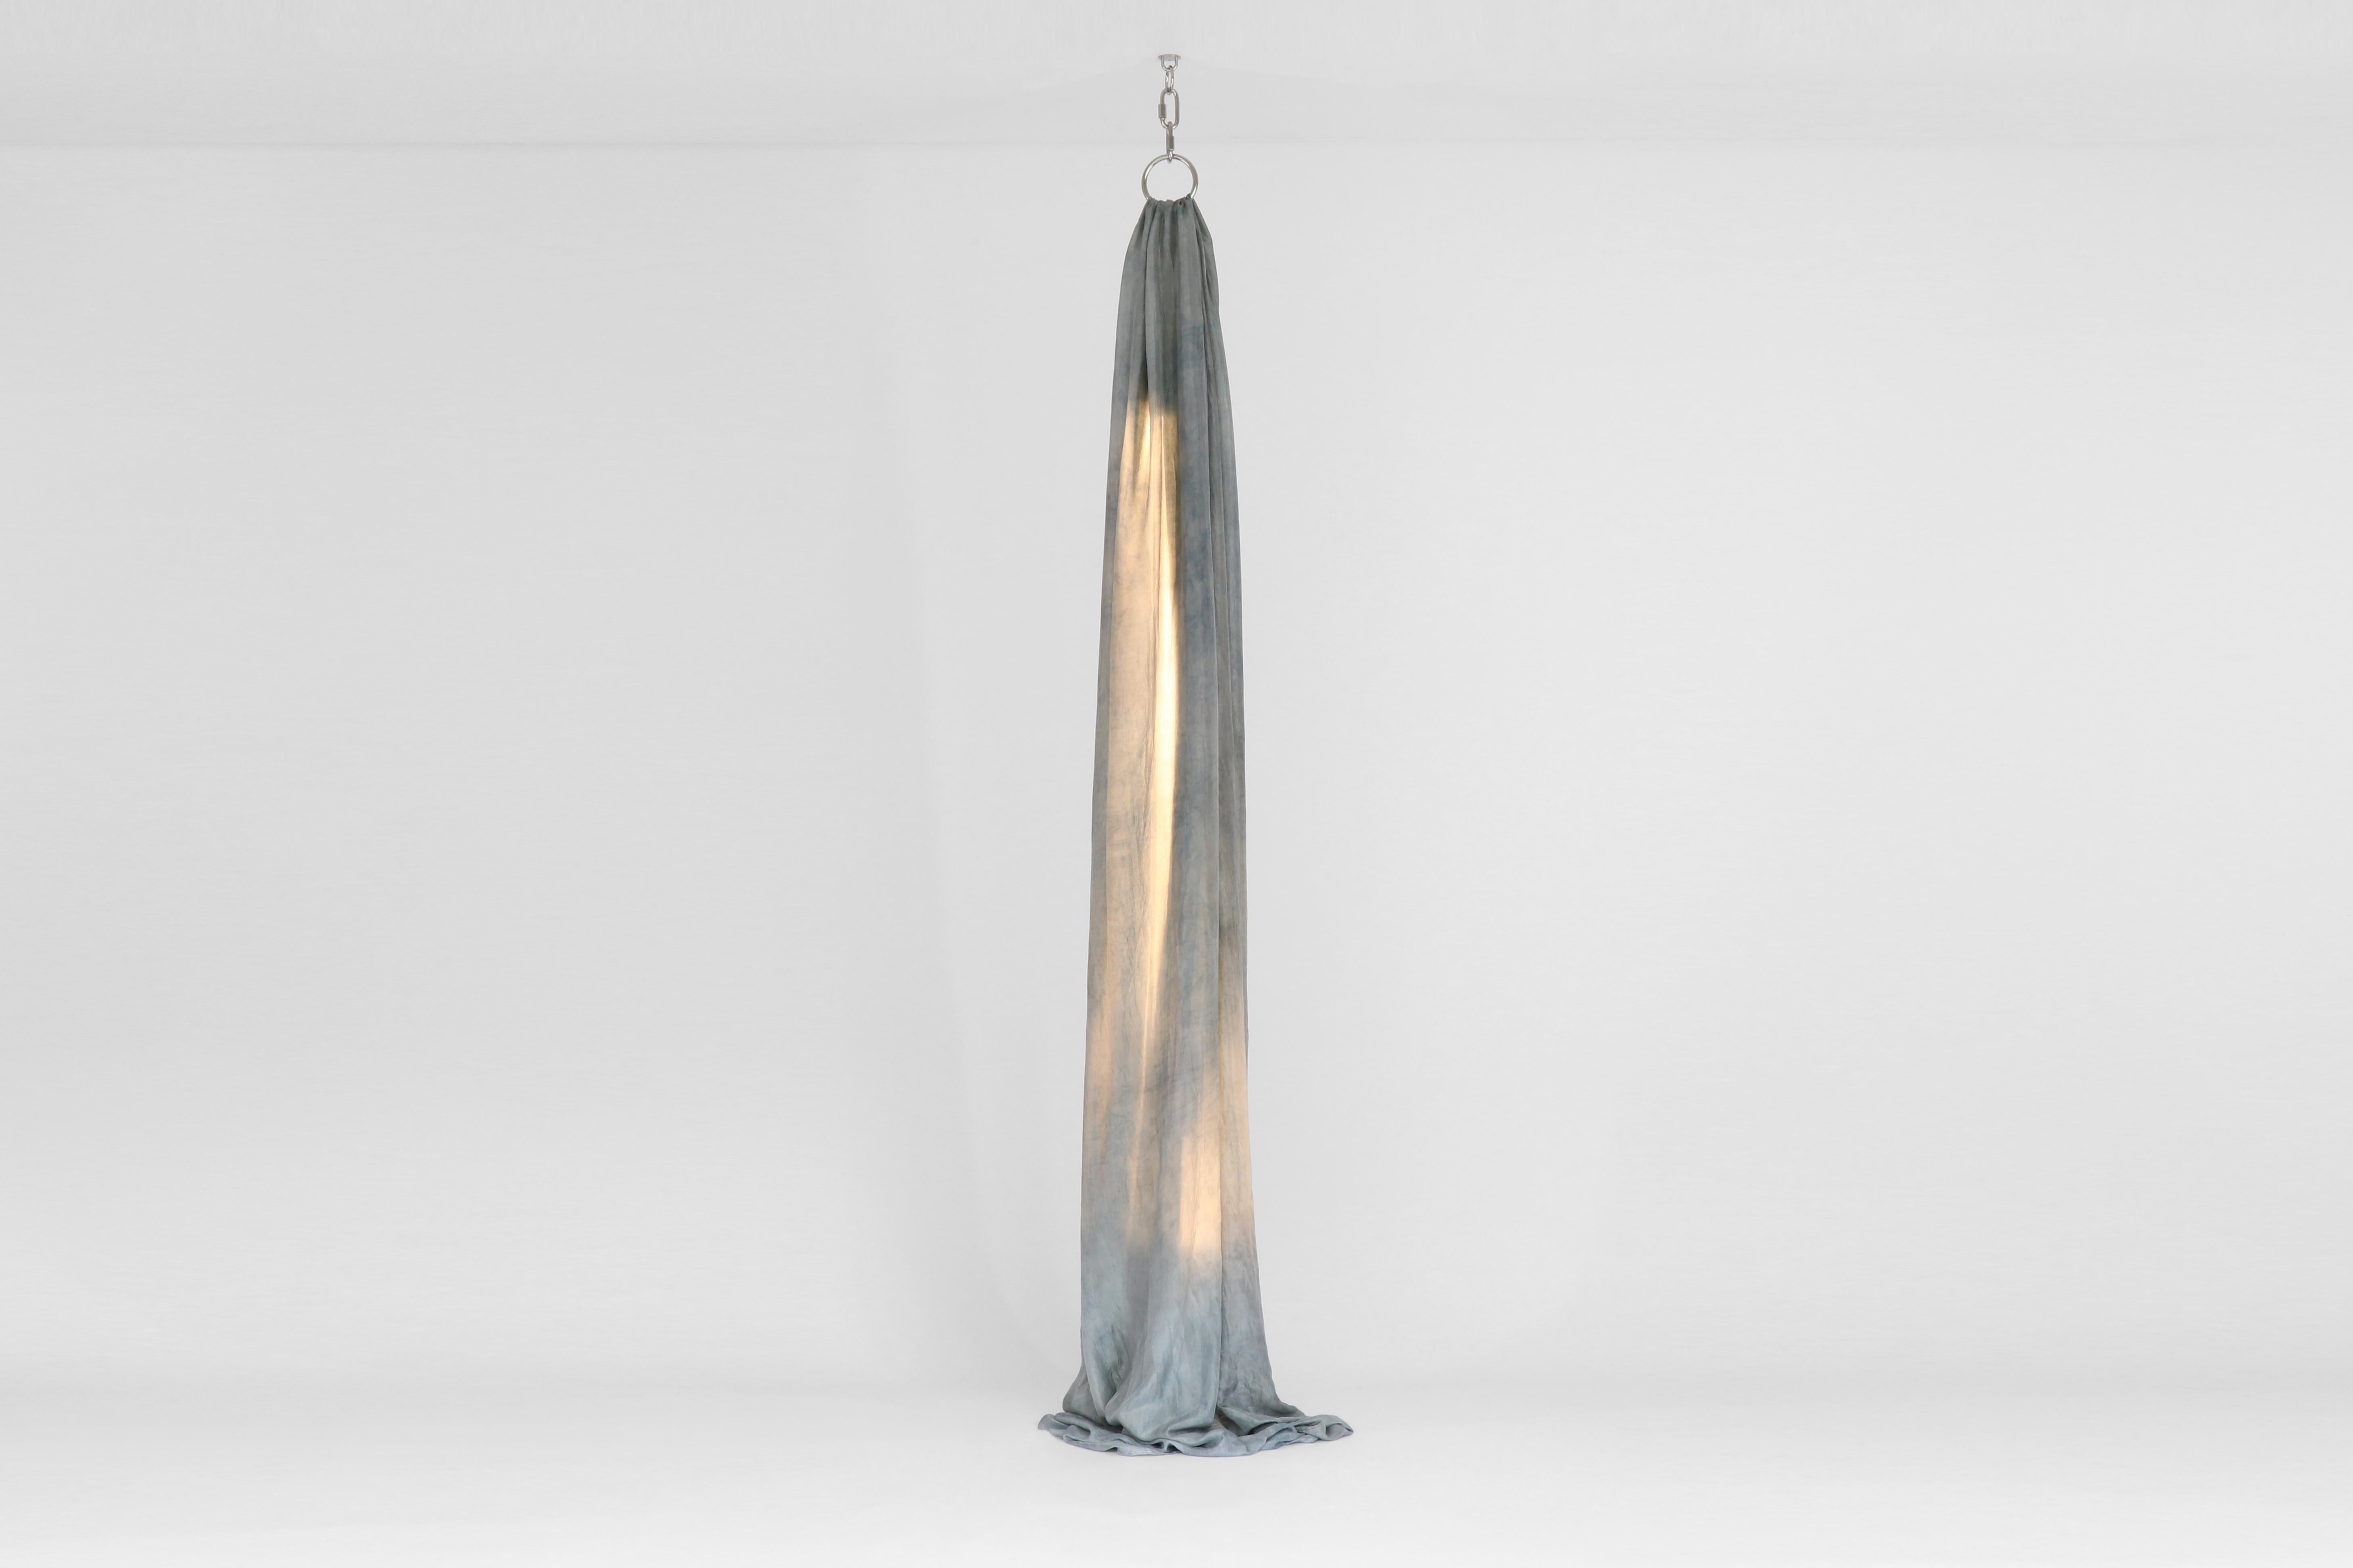 Amber rain sky light by Batten and Kamp
Sky Lights Collection
2020
Dimensions: Approximate W 40 x D 40 x H 260 cm
Materials: Silk, natural pigments, stainless steel hardware, Hay LED tube

Each silk is dyed by hand using natural pigment so there is